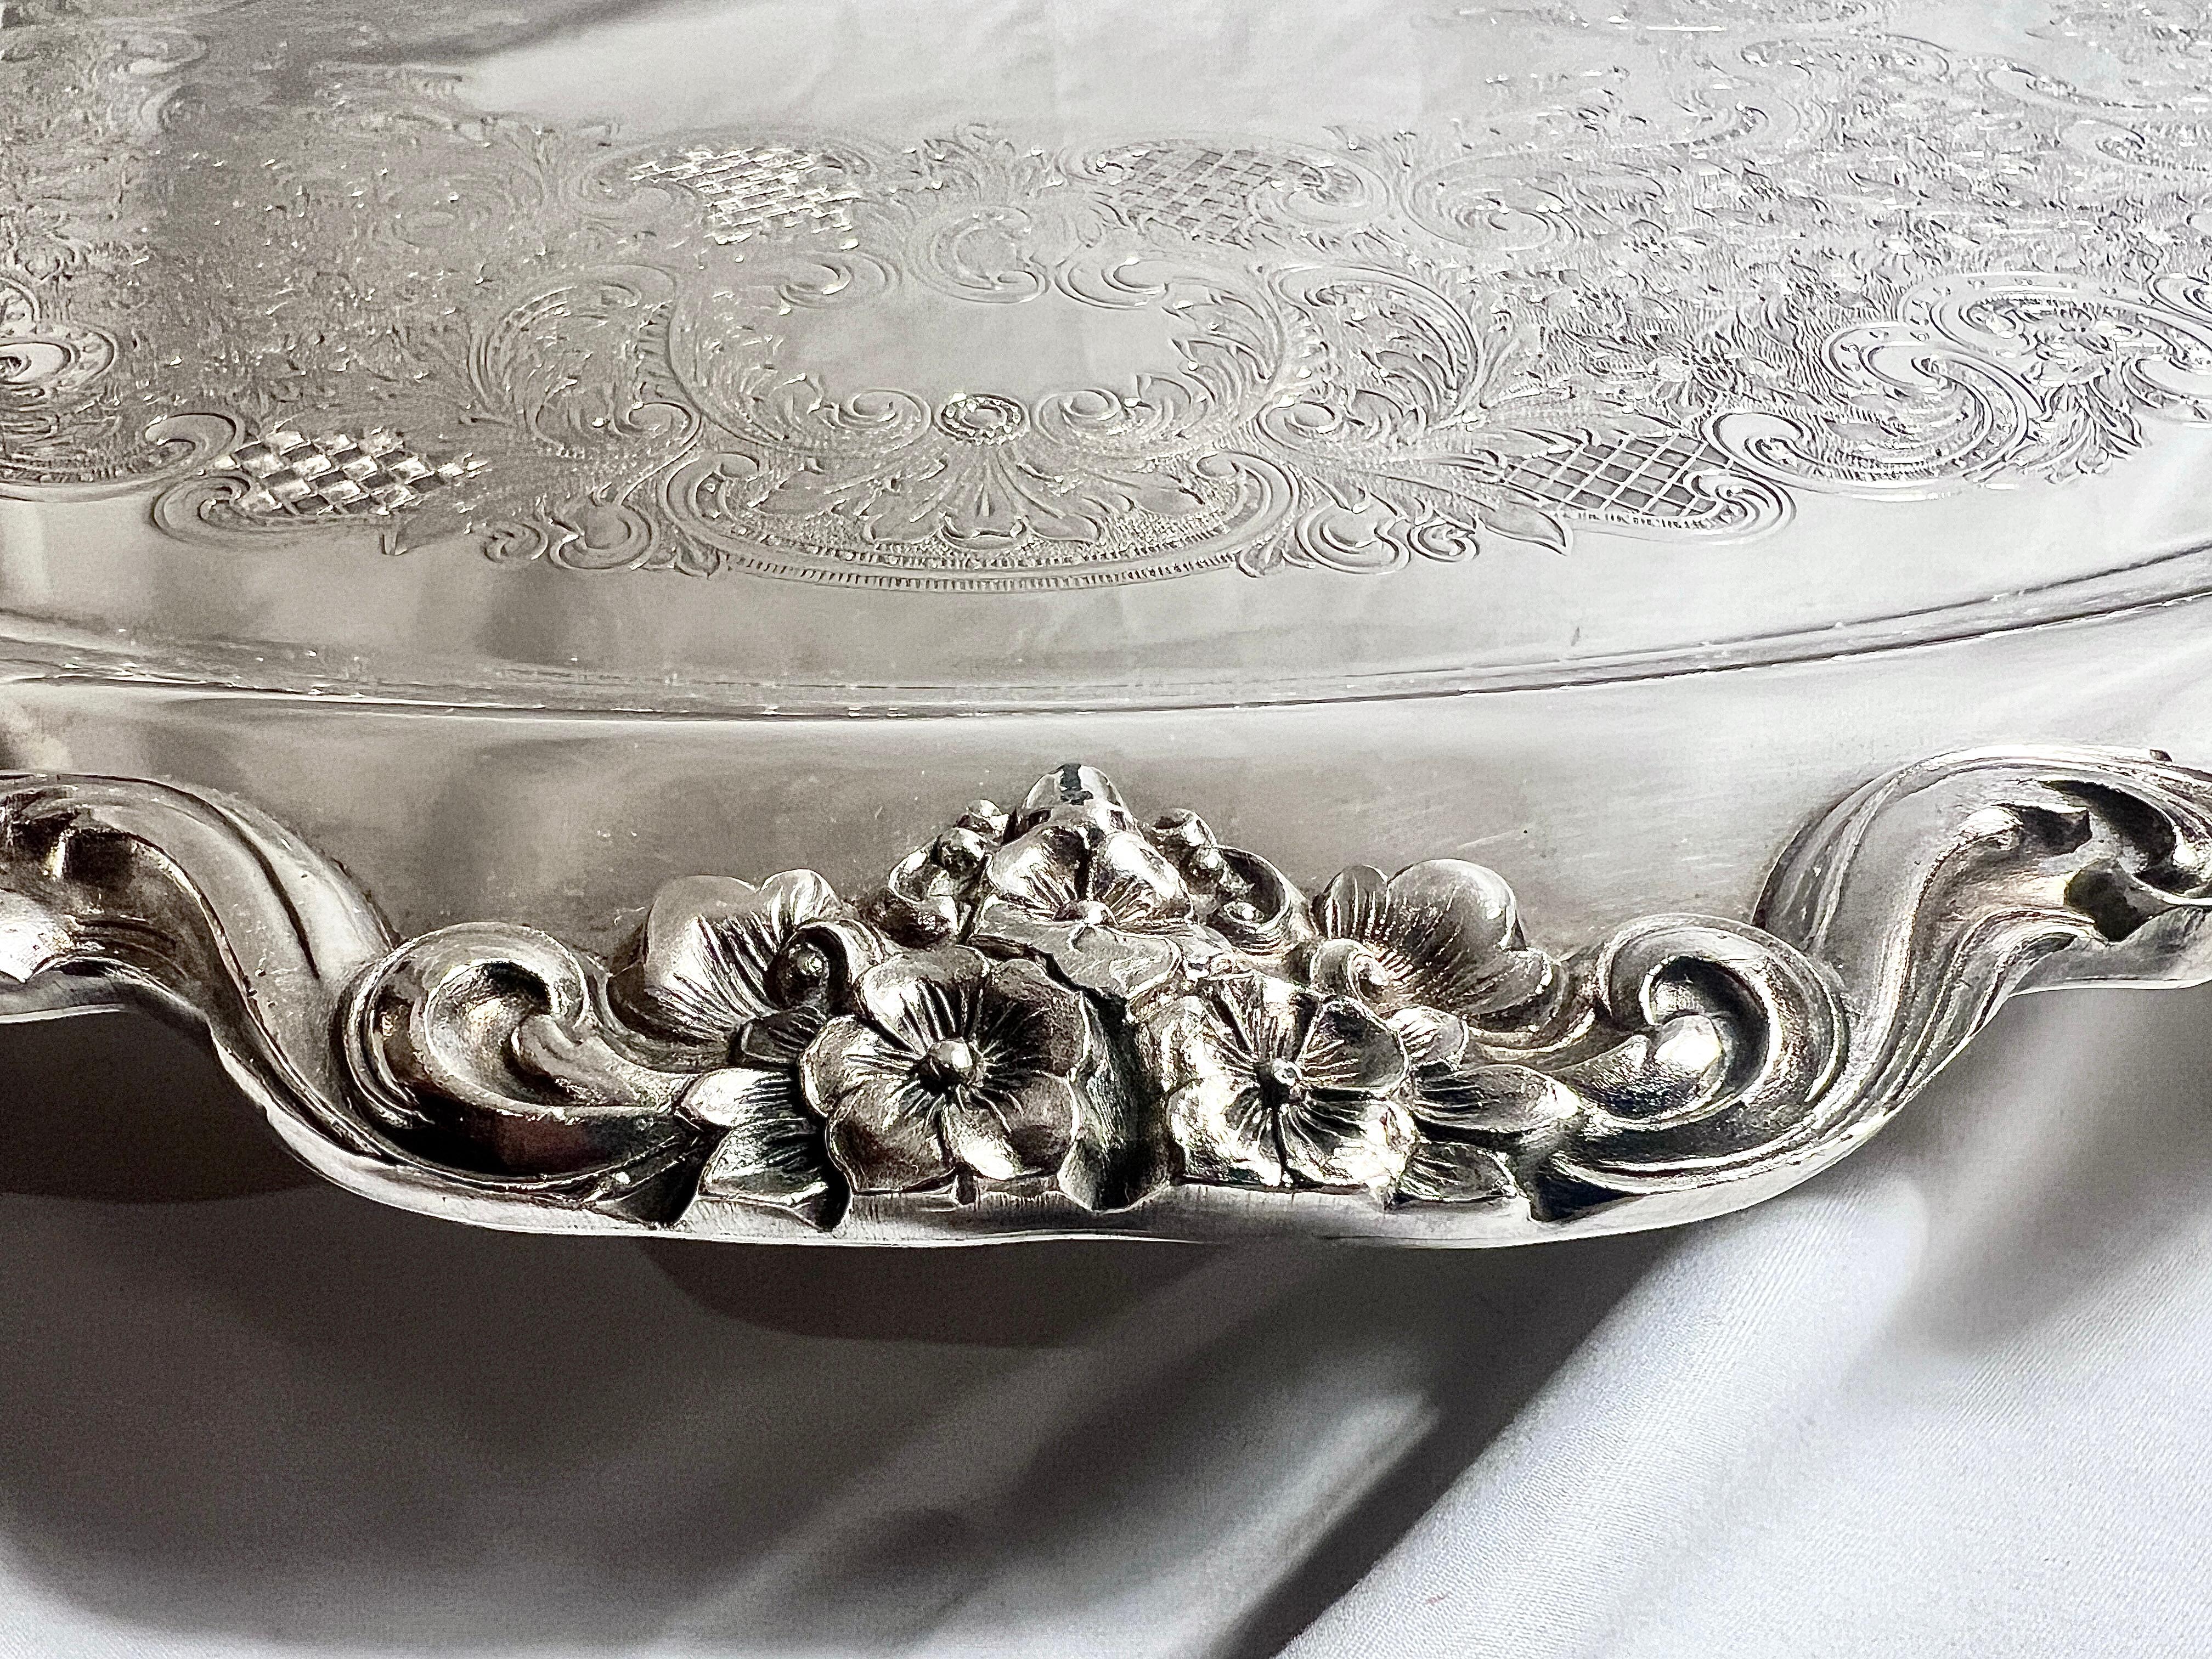 Antique English Sheffield Silver Footed Tray with Rose Border, Circa 1890.
We have a similar tray to this one which is not footed.  See Reference LU2854336787592 or SIL842